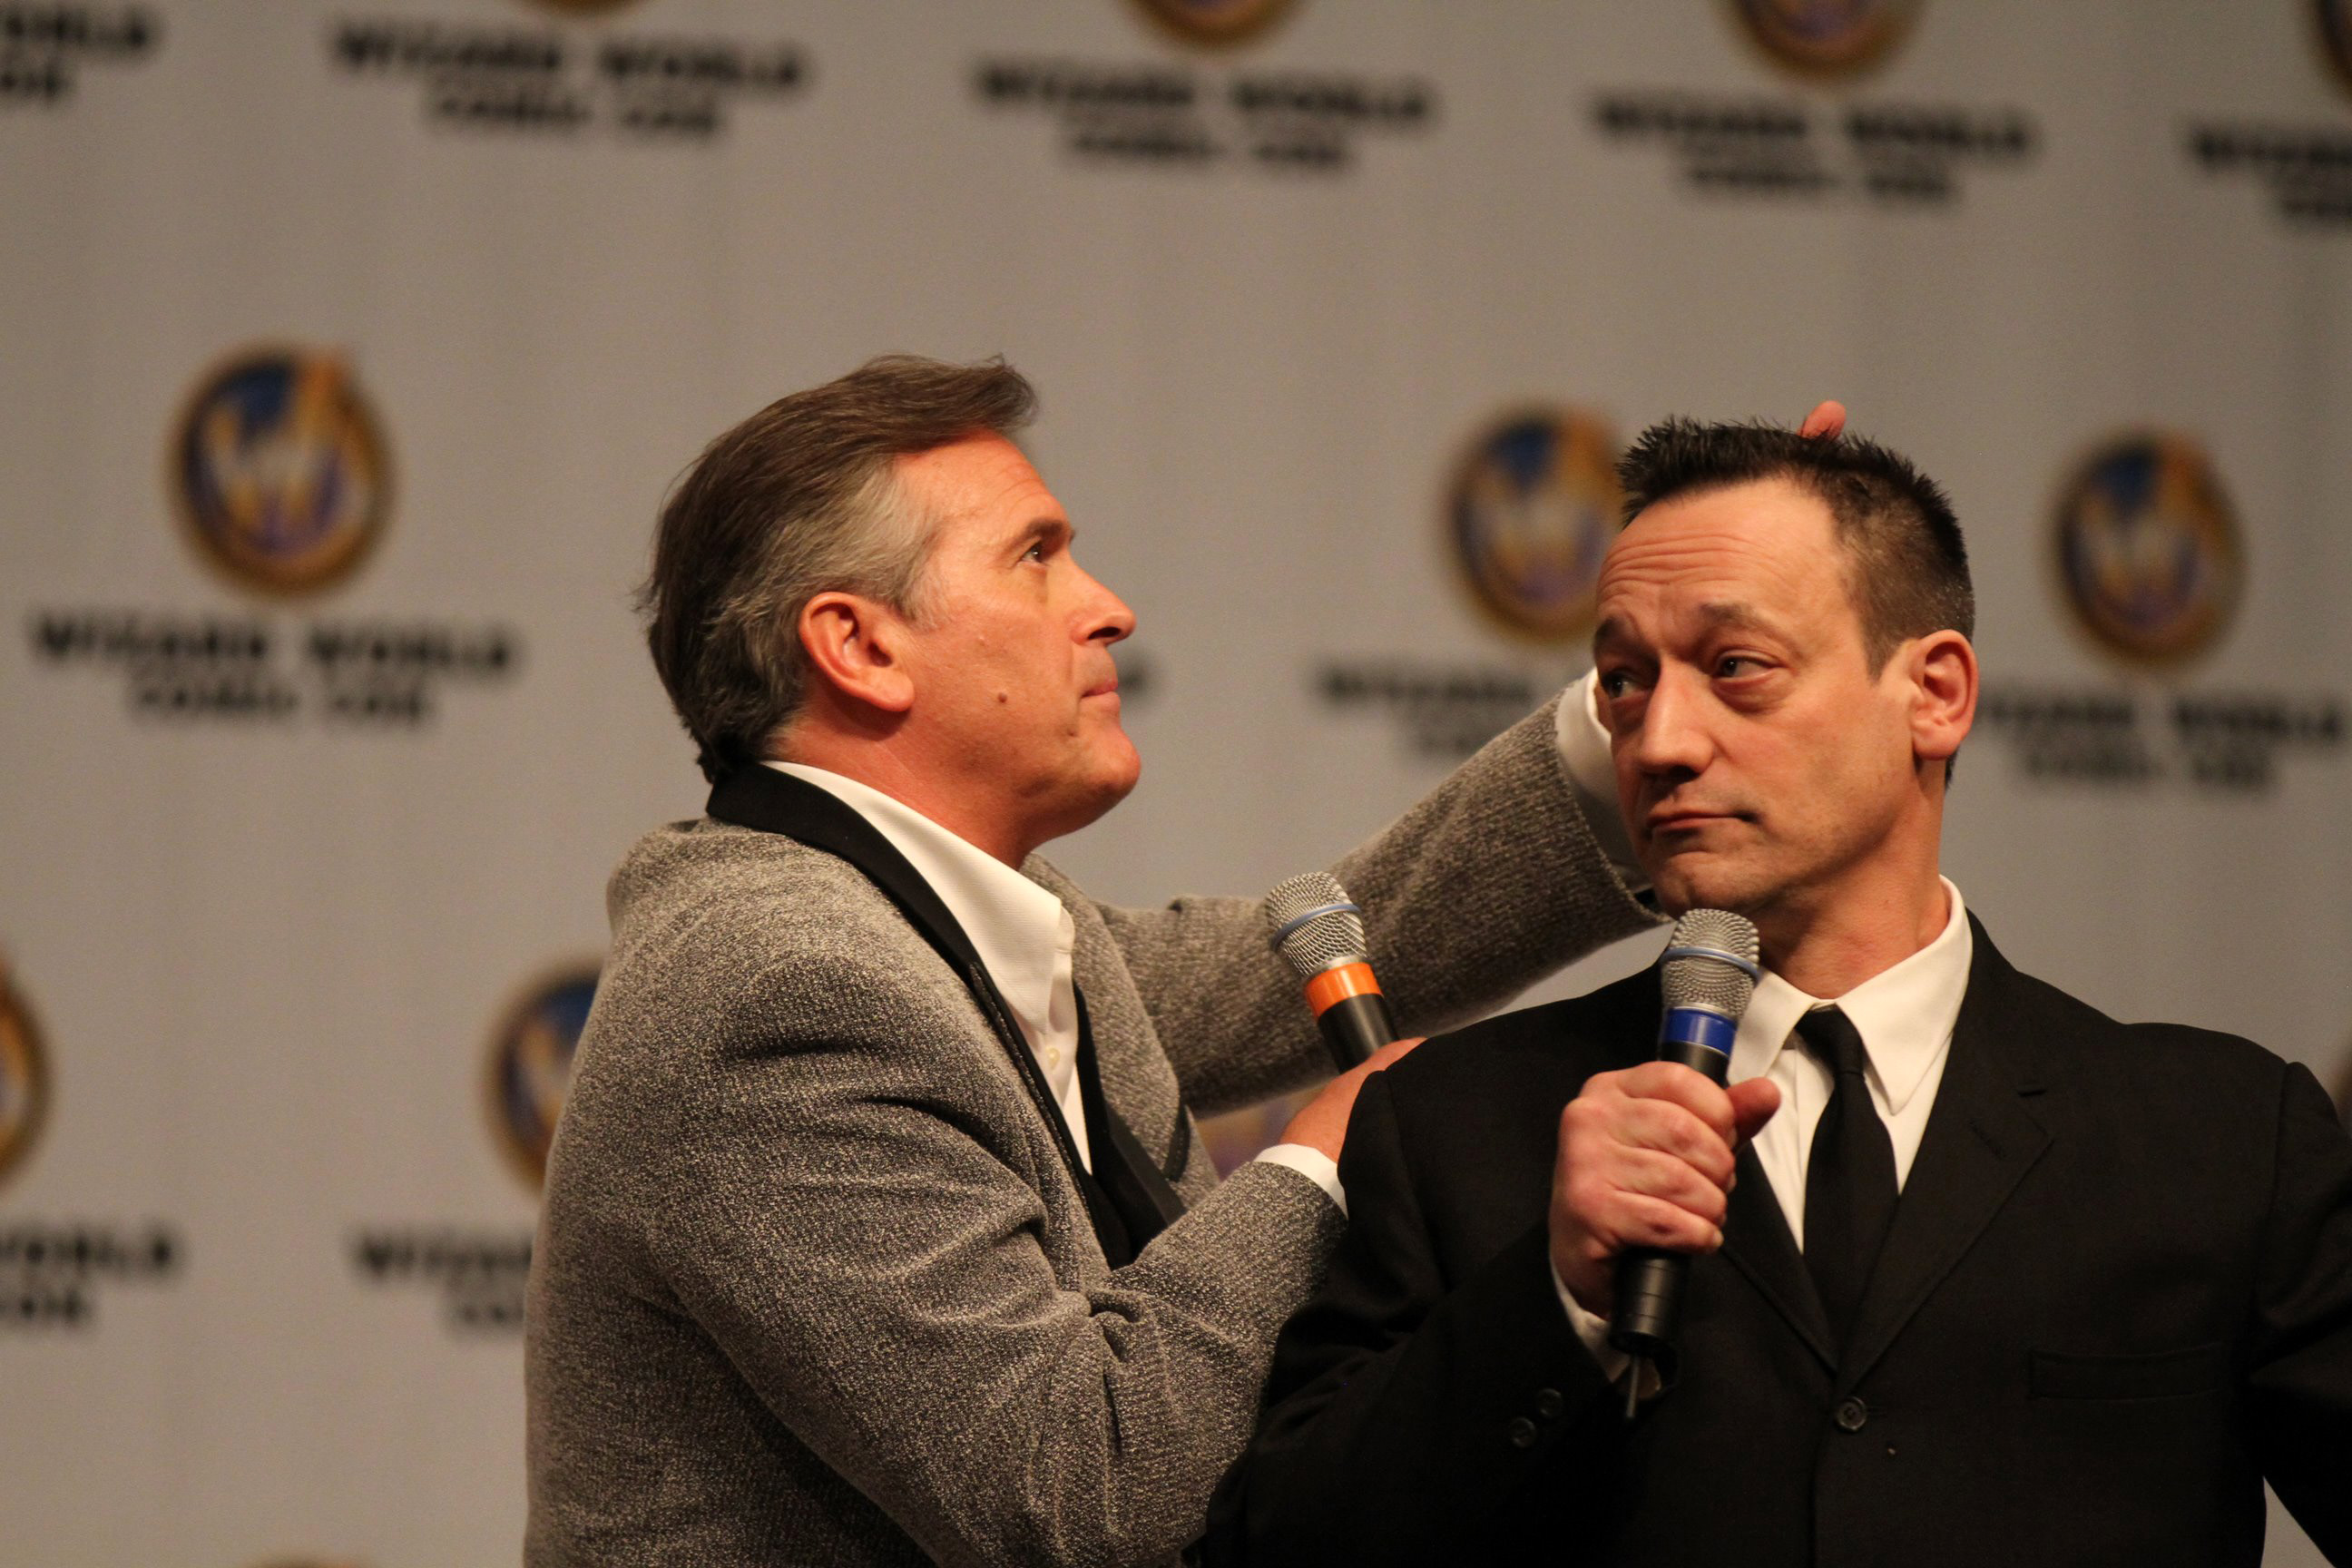 Bruce Campbell and Ted Raimi. Photo Credit: Kevin Brackett